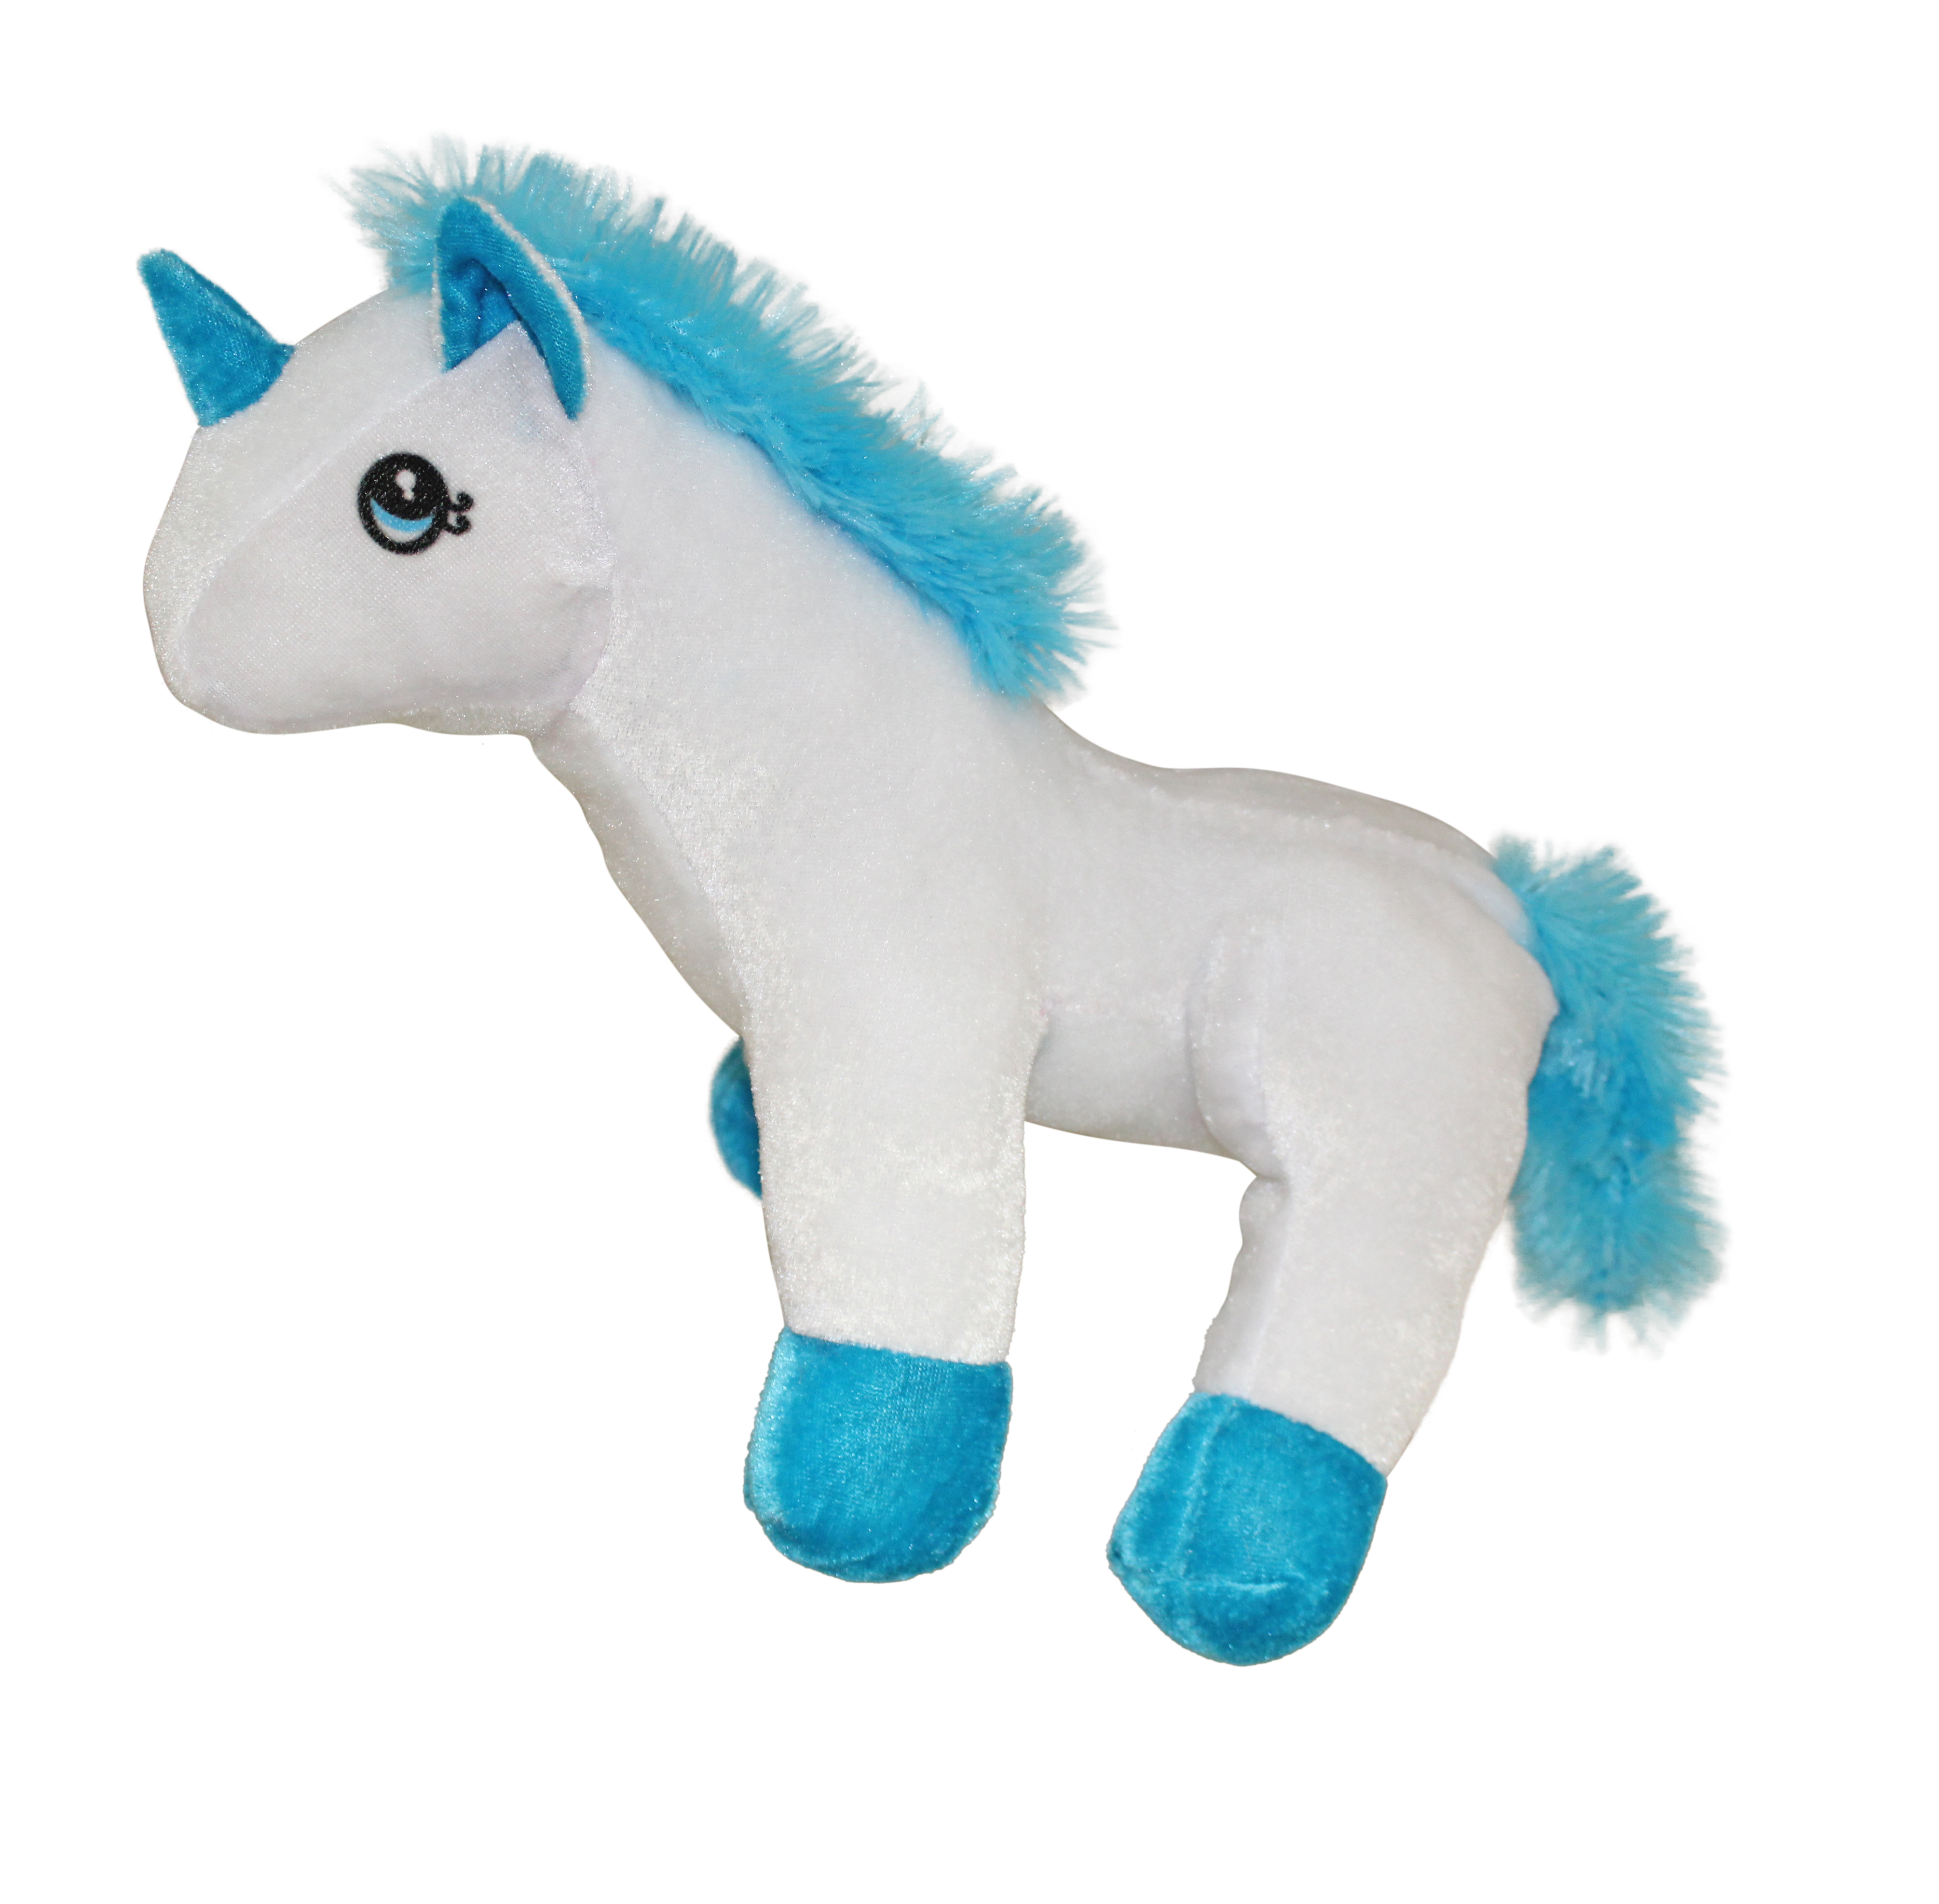 Plush Pal 12" Soft & Fluffy Blue Unicorn Stuffed Animal Toy with Blue Teal Tail And Mane - image 3 of 6